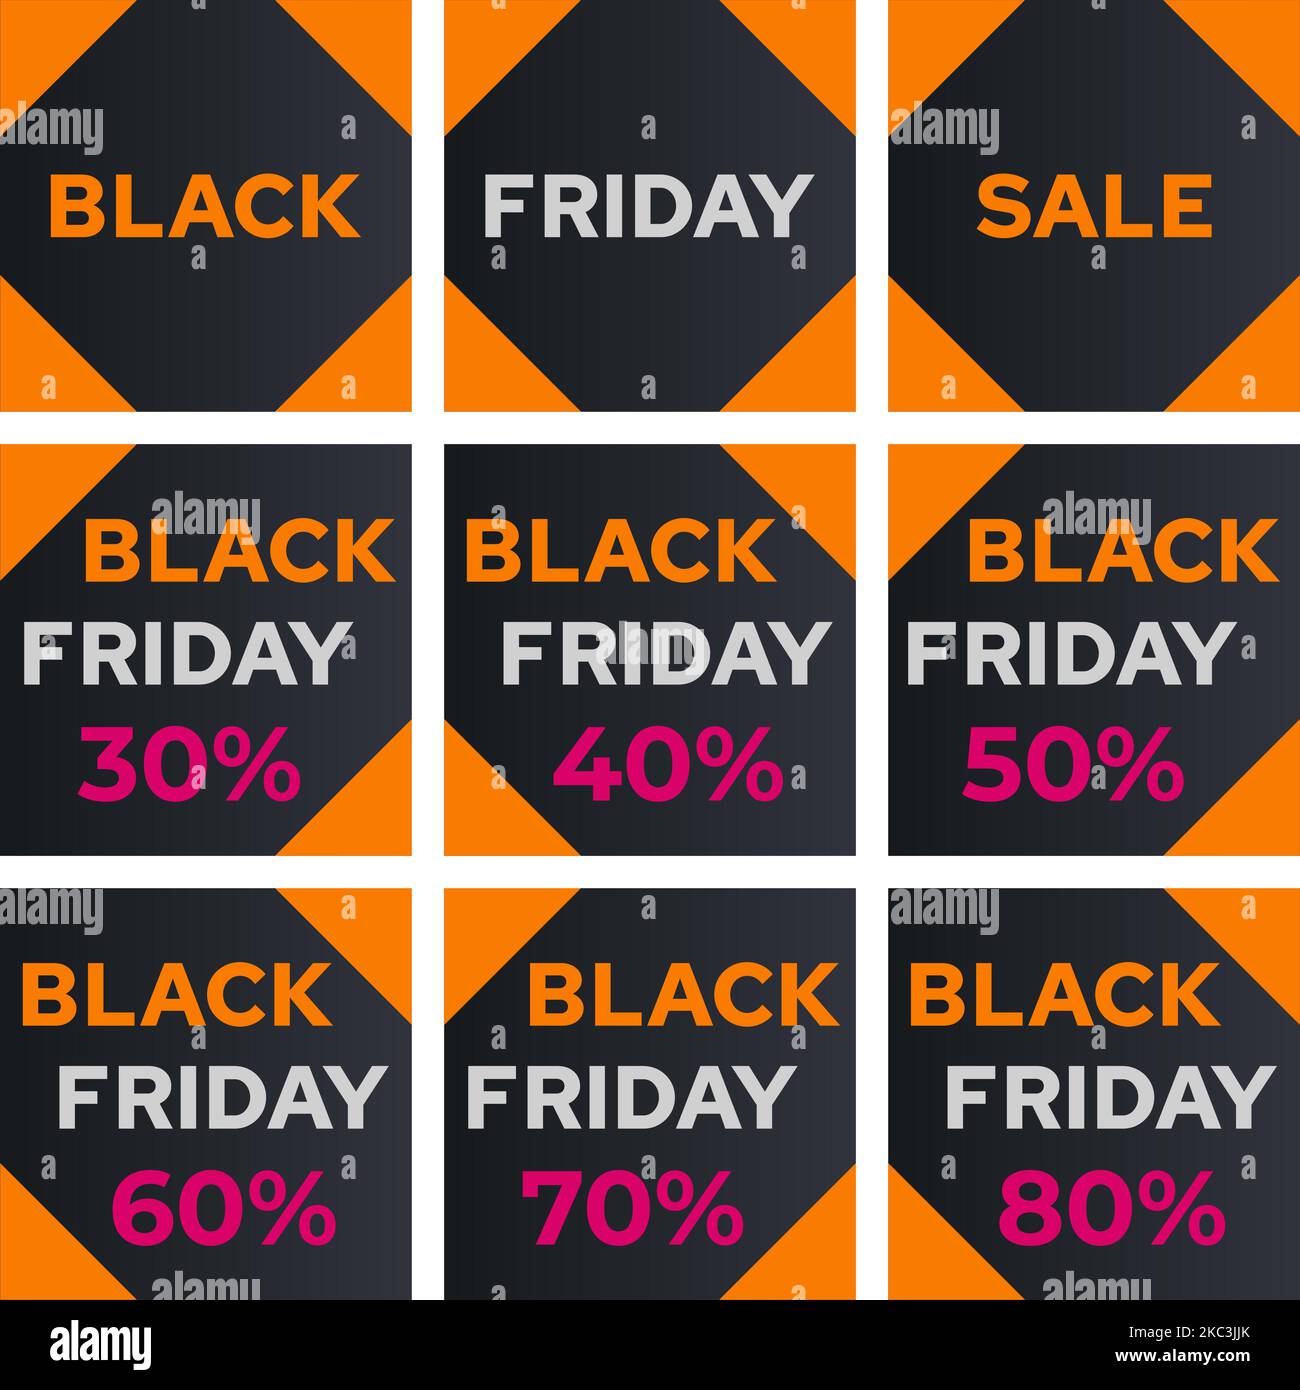 Set of Covers for Black Friday Social Media Post. Stock Vector